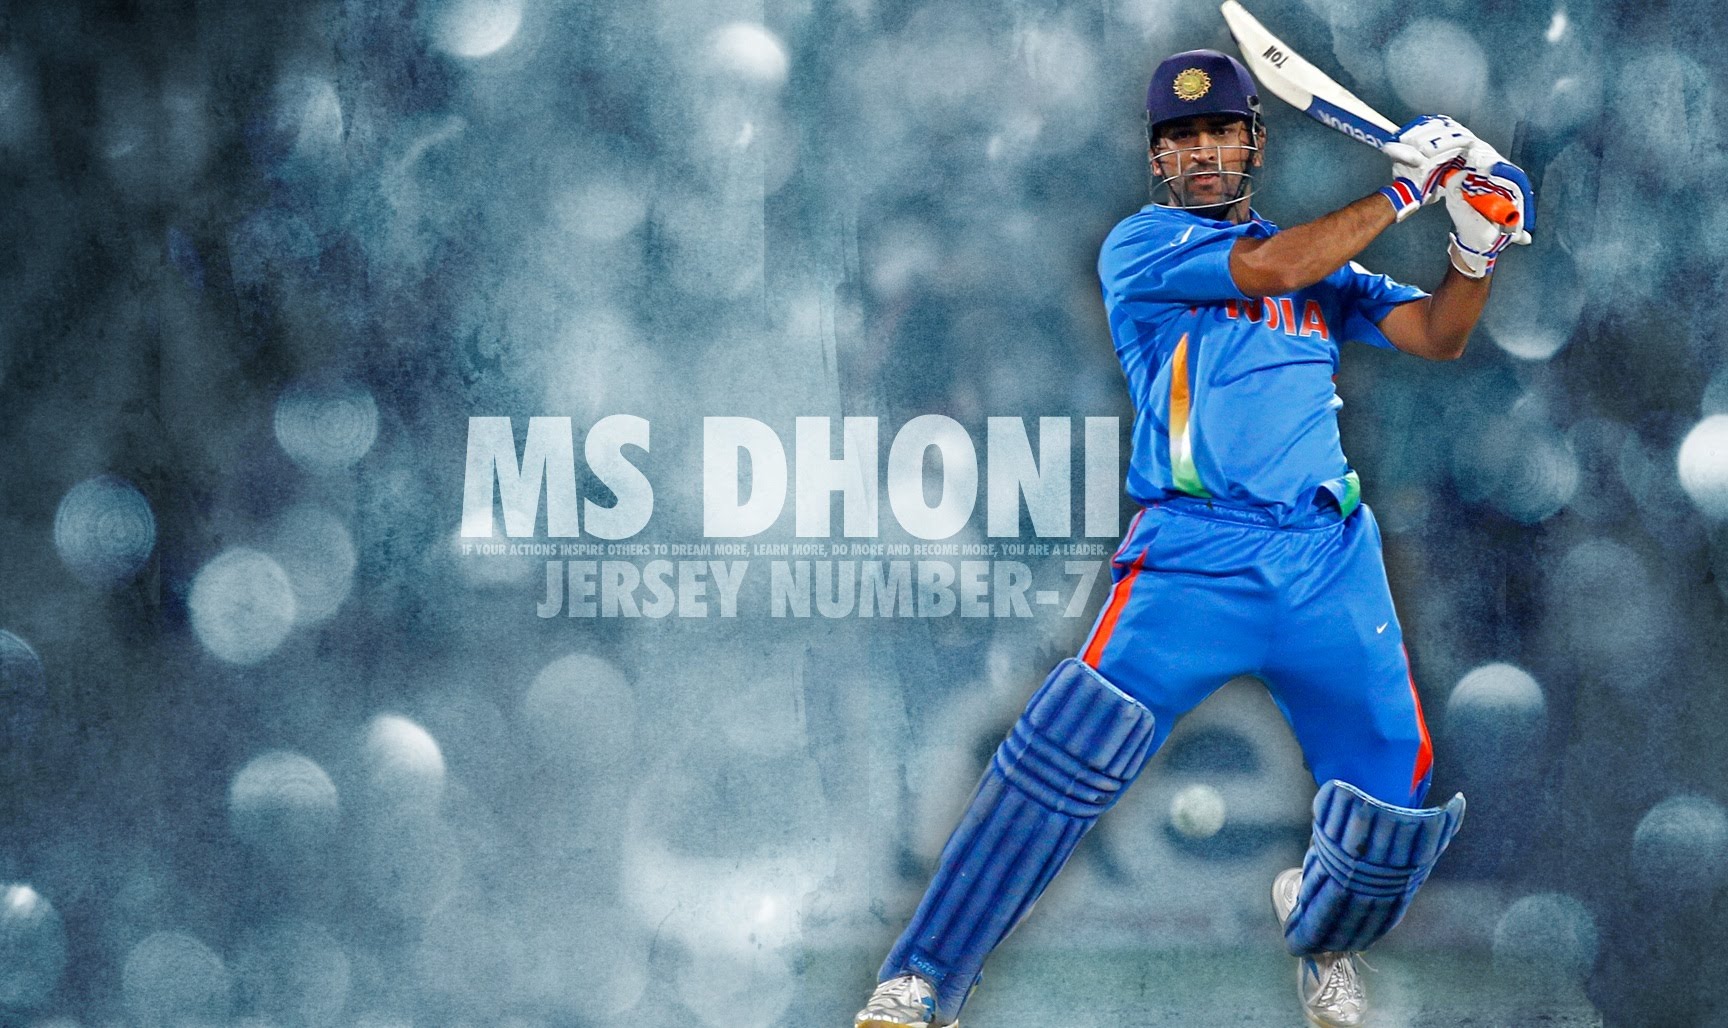 Mahendra Singh Dhoni Latest Photos Wallpapers Downloads